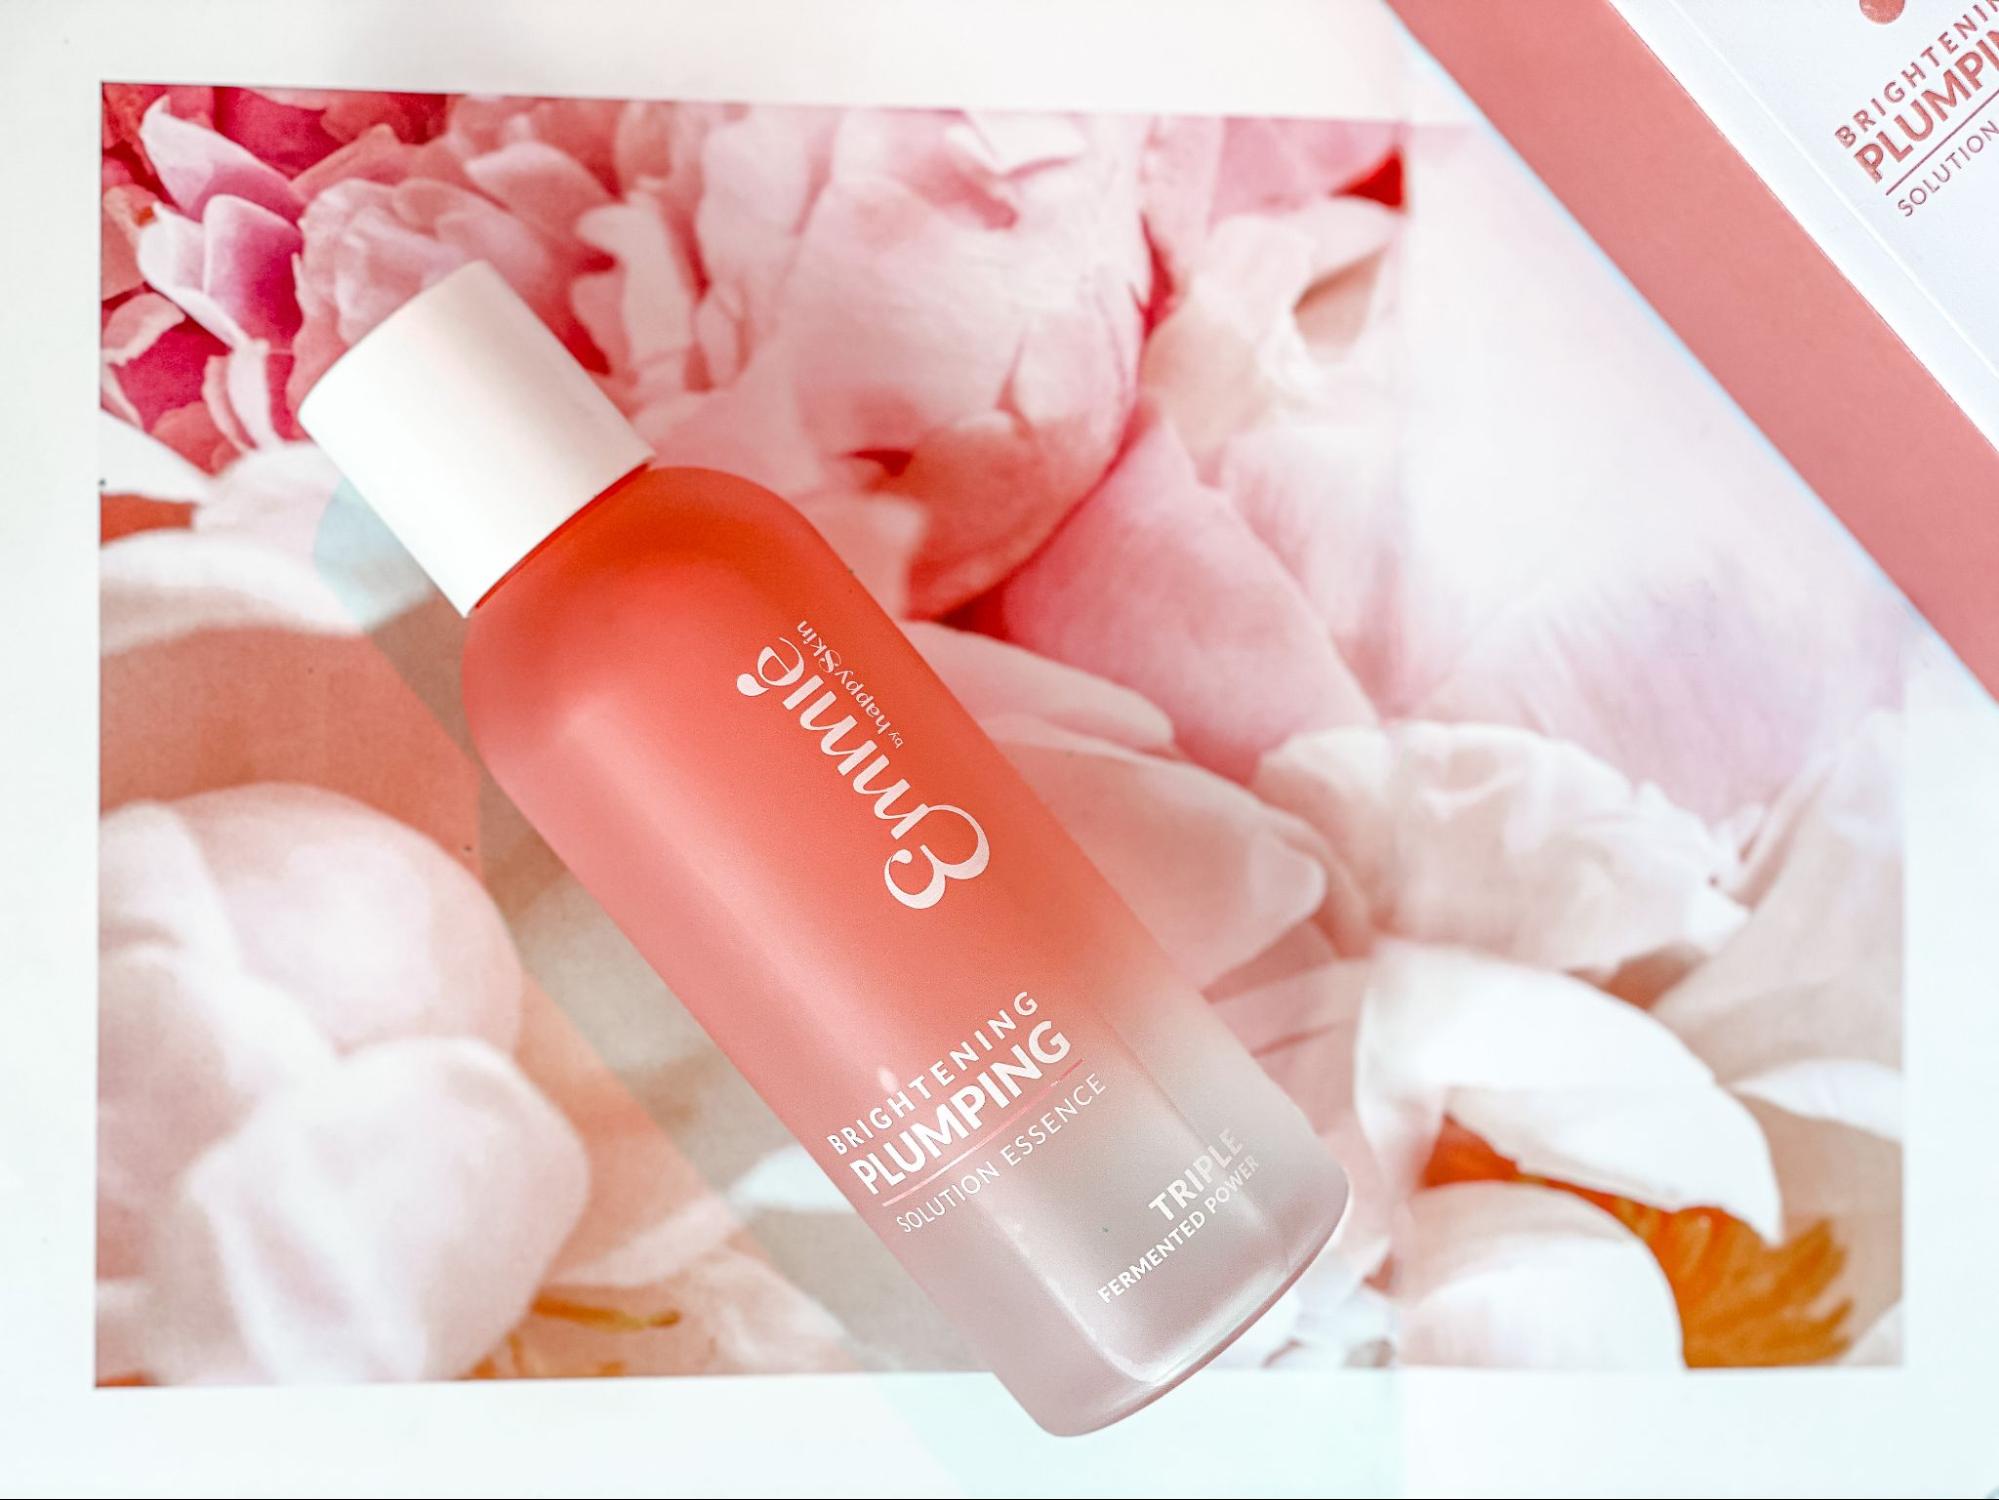 emmie-by-happyskin-nuoc-than-emmie-brightening-plumping-solution-essence-1